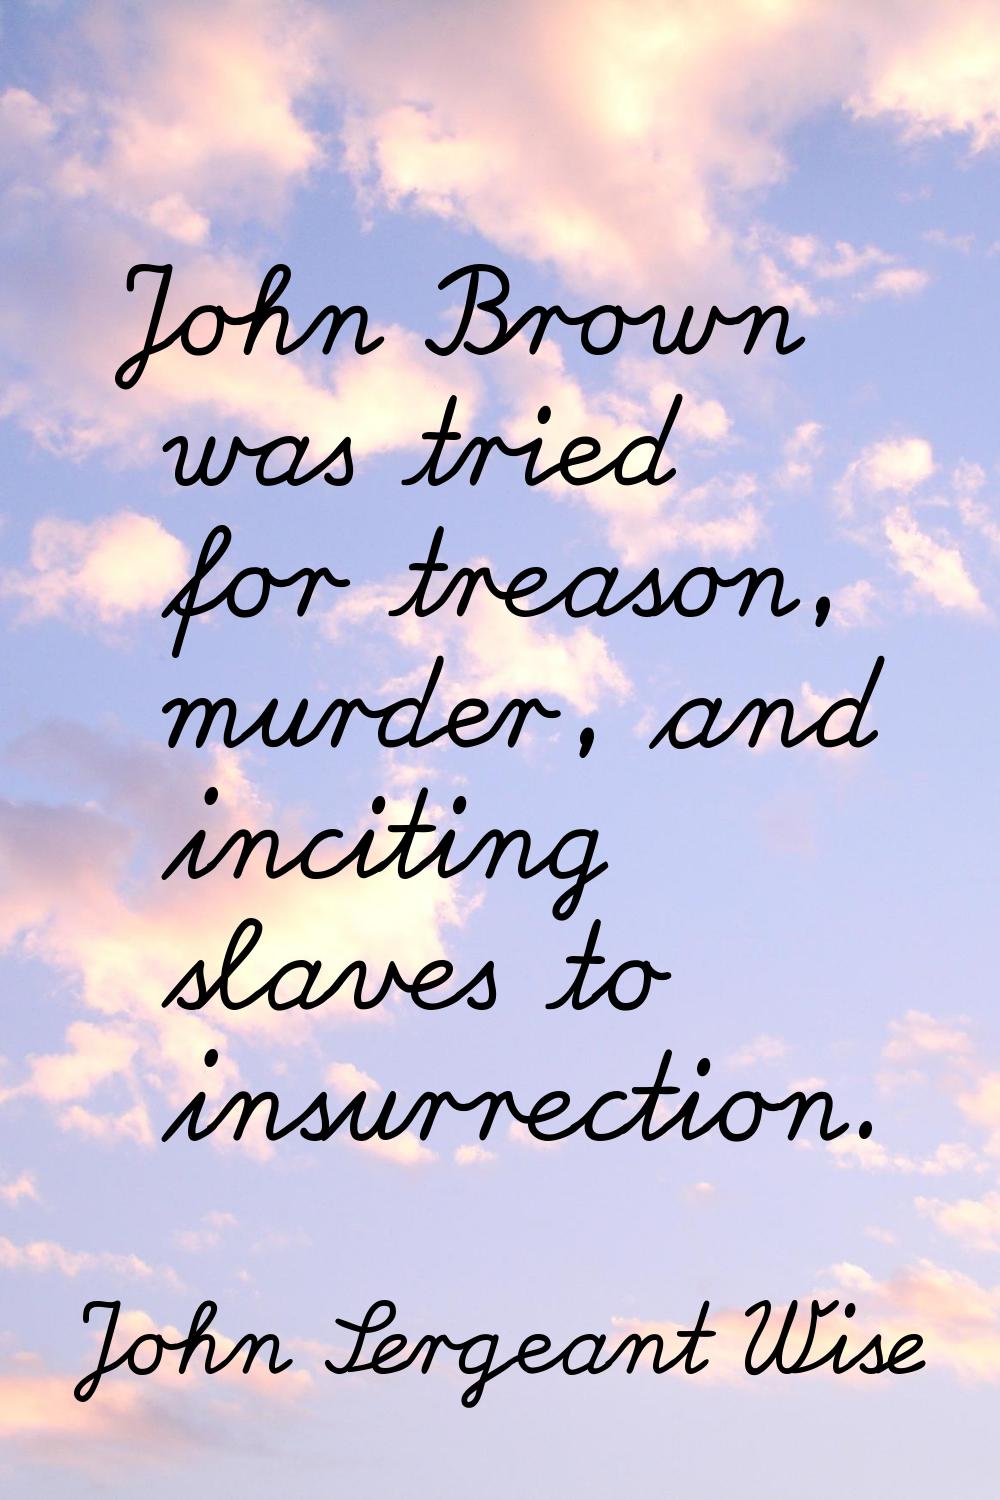 John Brown was tried for treason, murder, and inciting slaves to insurrection.